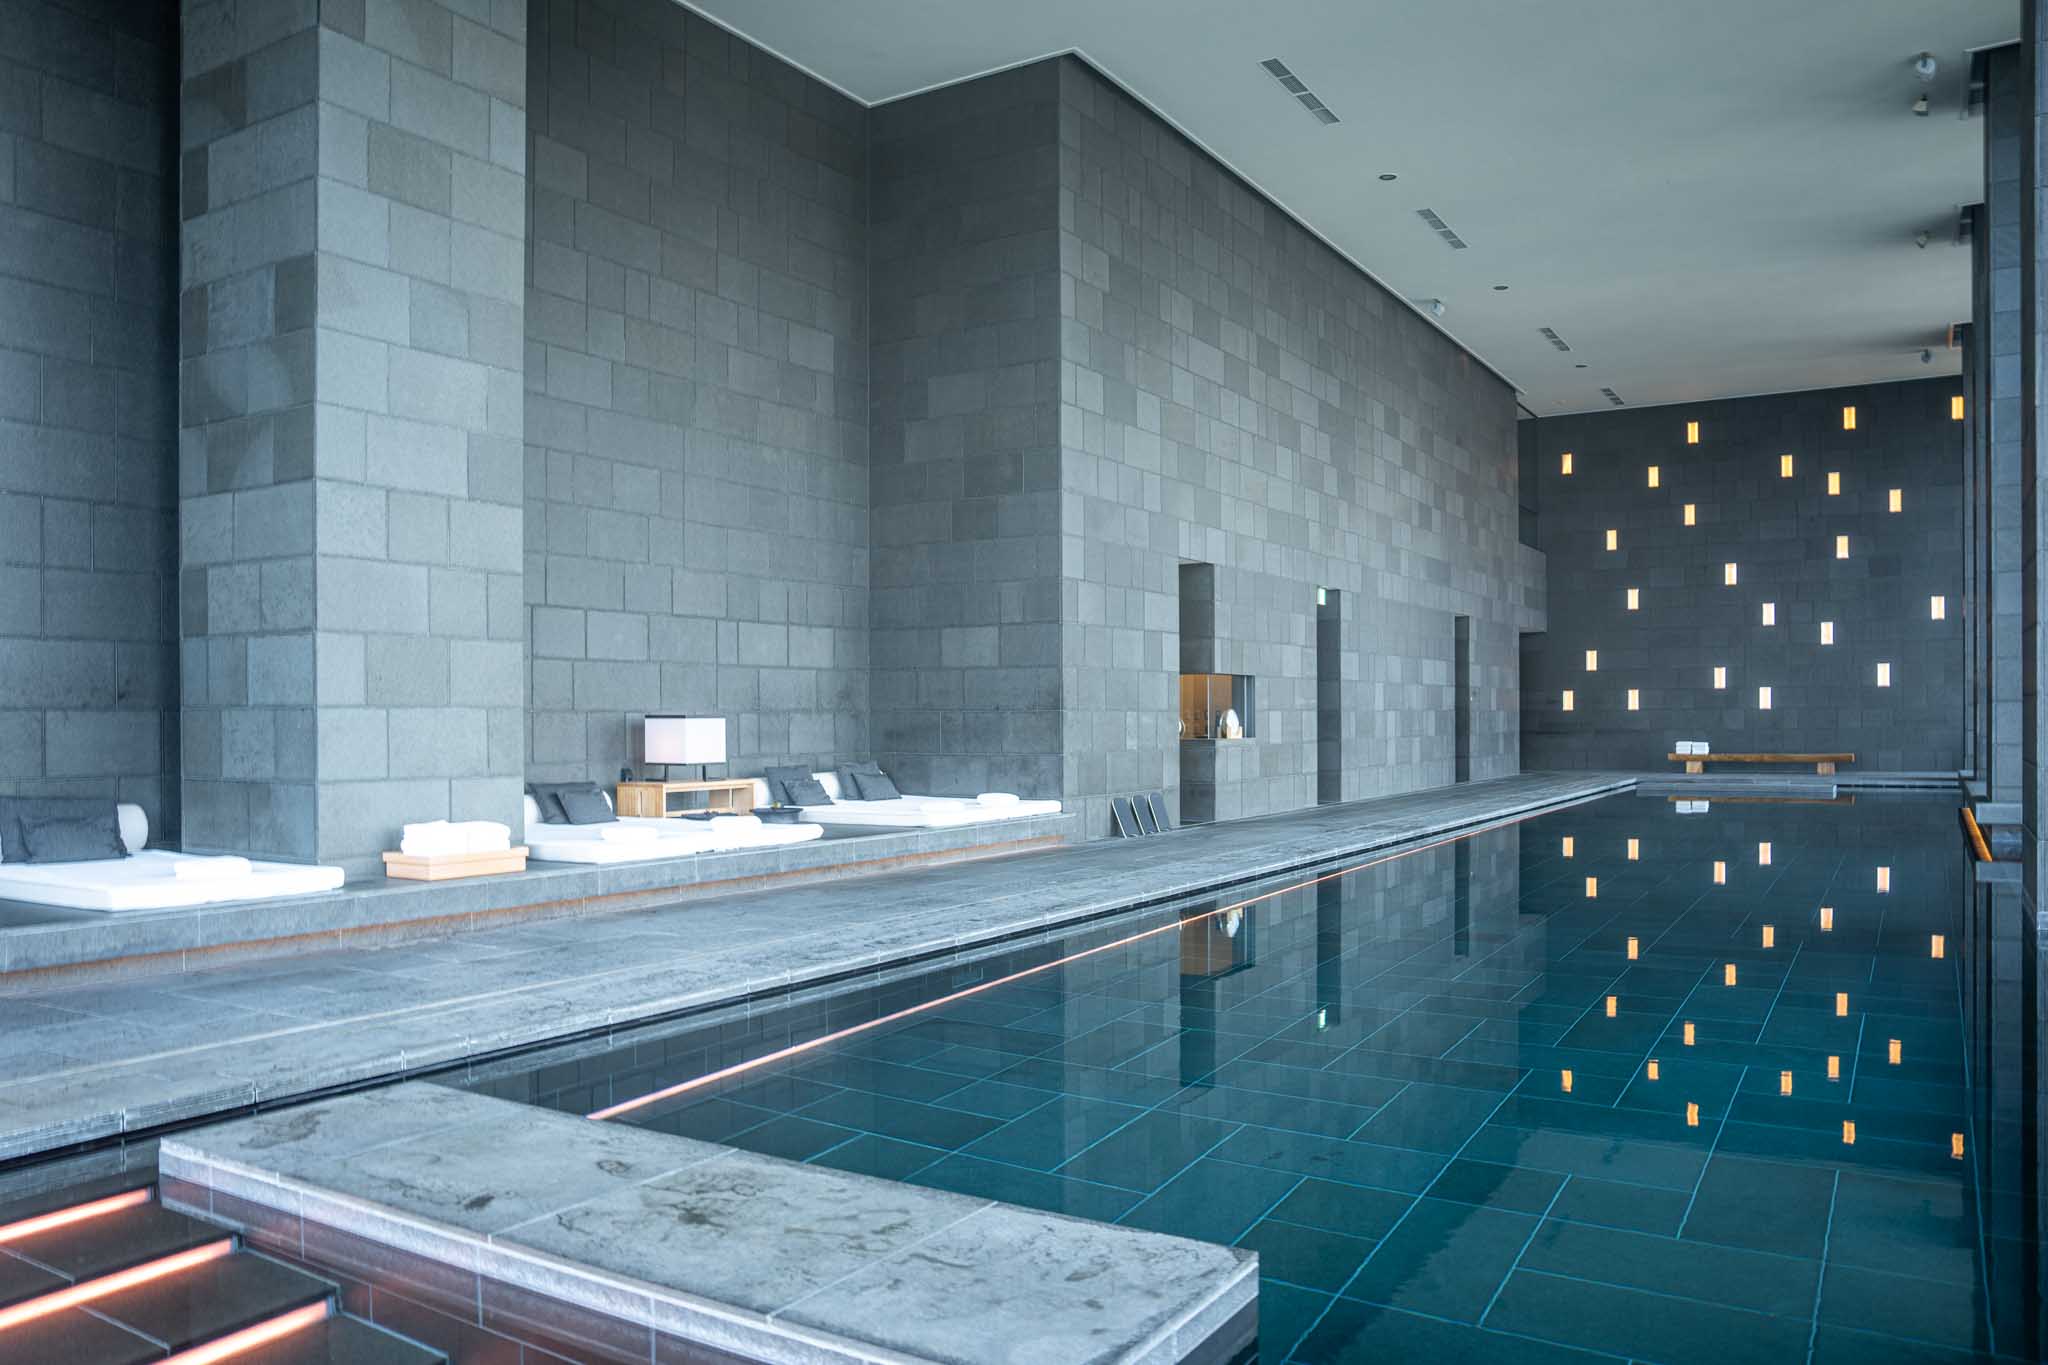 a swimming pool in a room